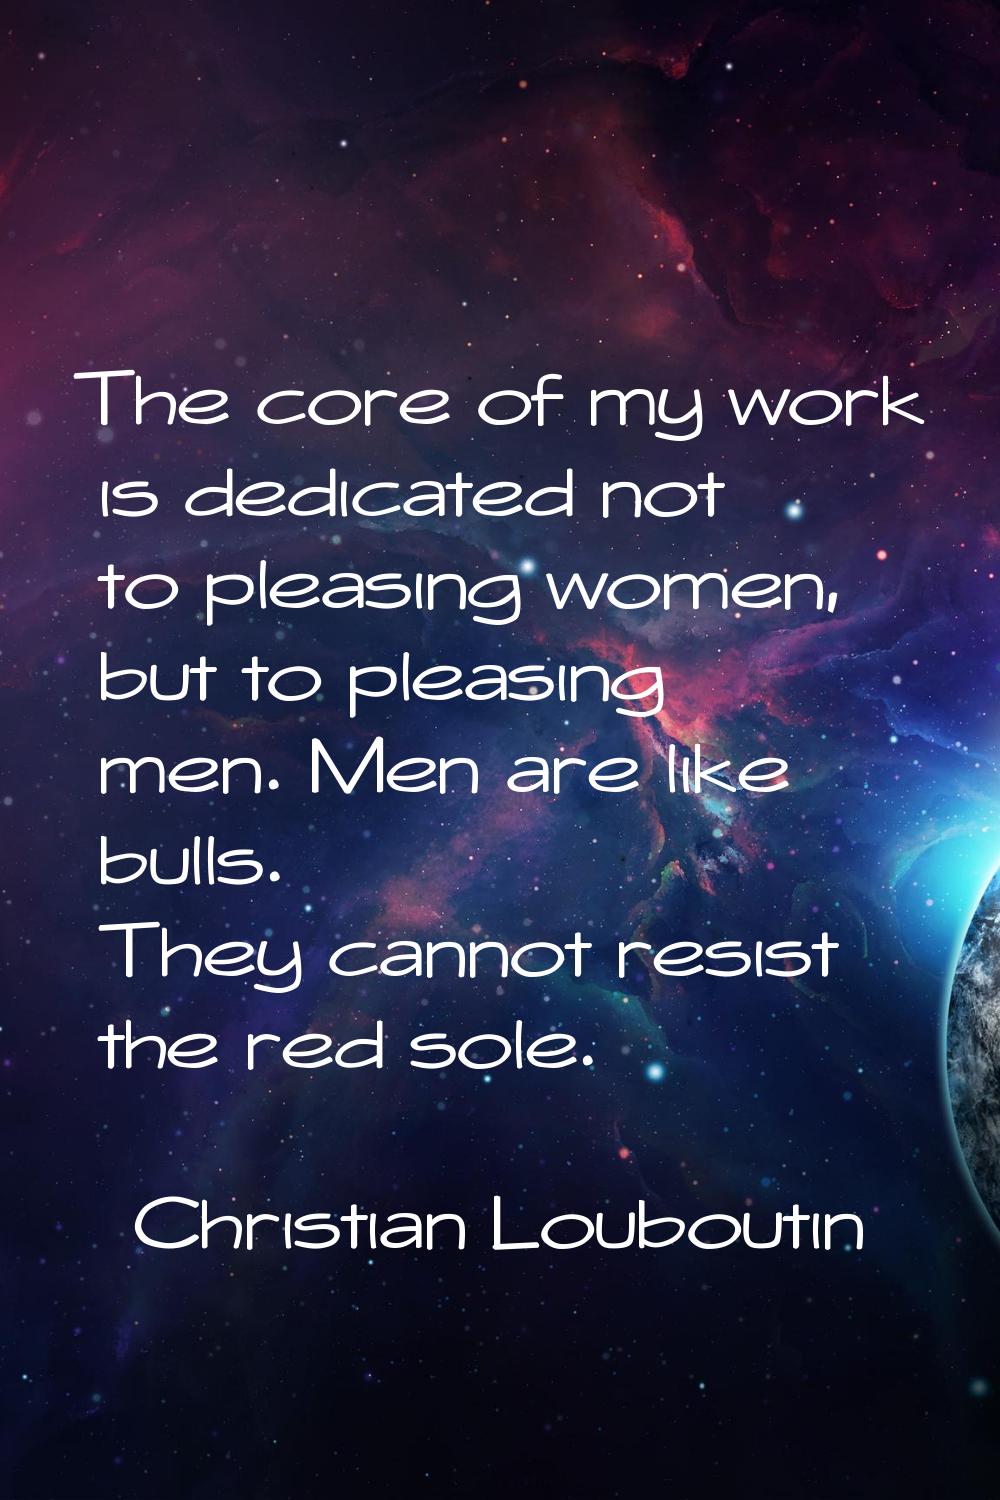 The core of my work is dedicated not to pleasing women, but to pleasing men. Men are like bulls. Th